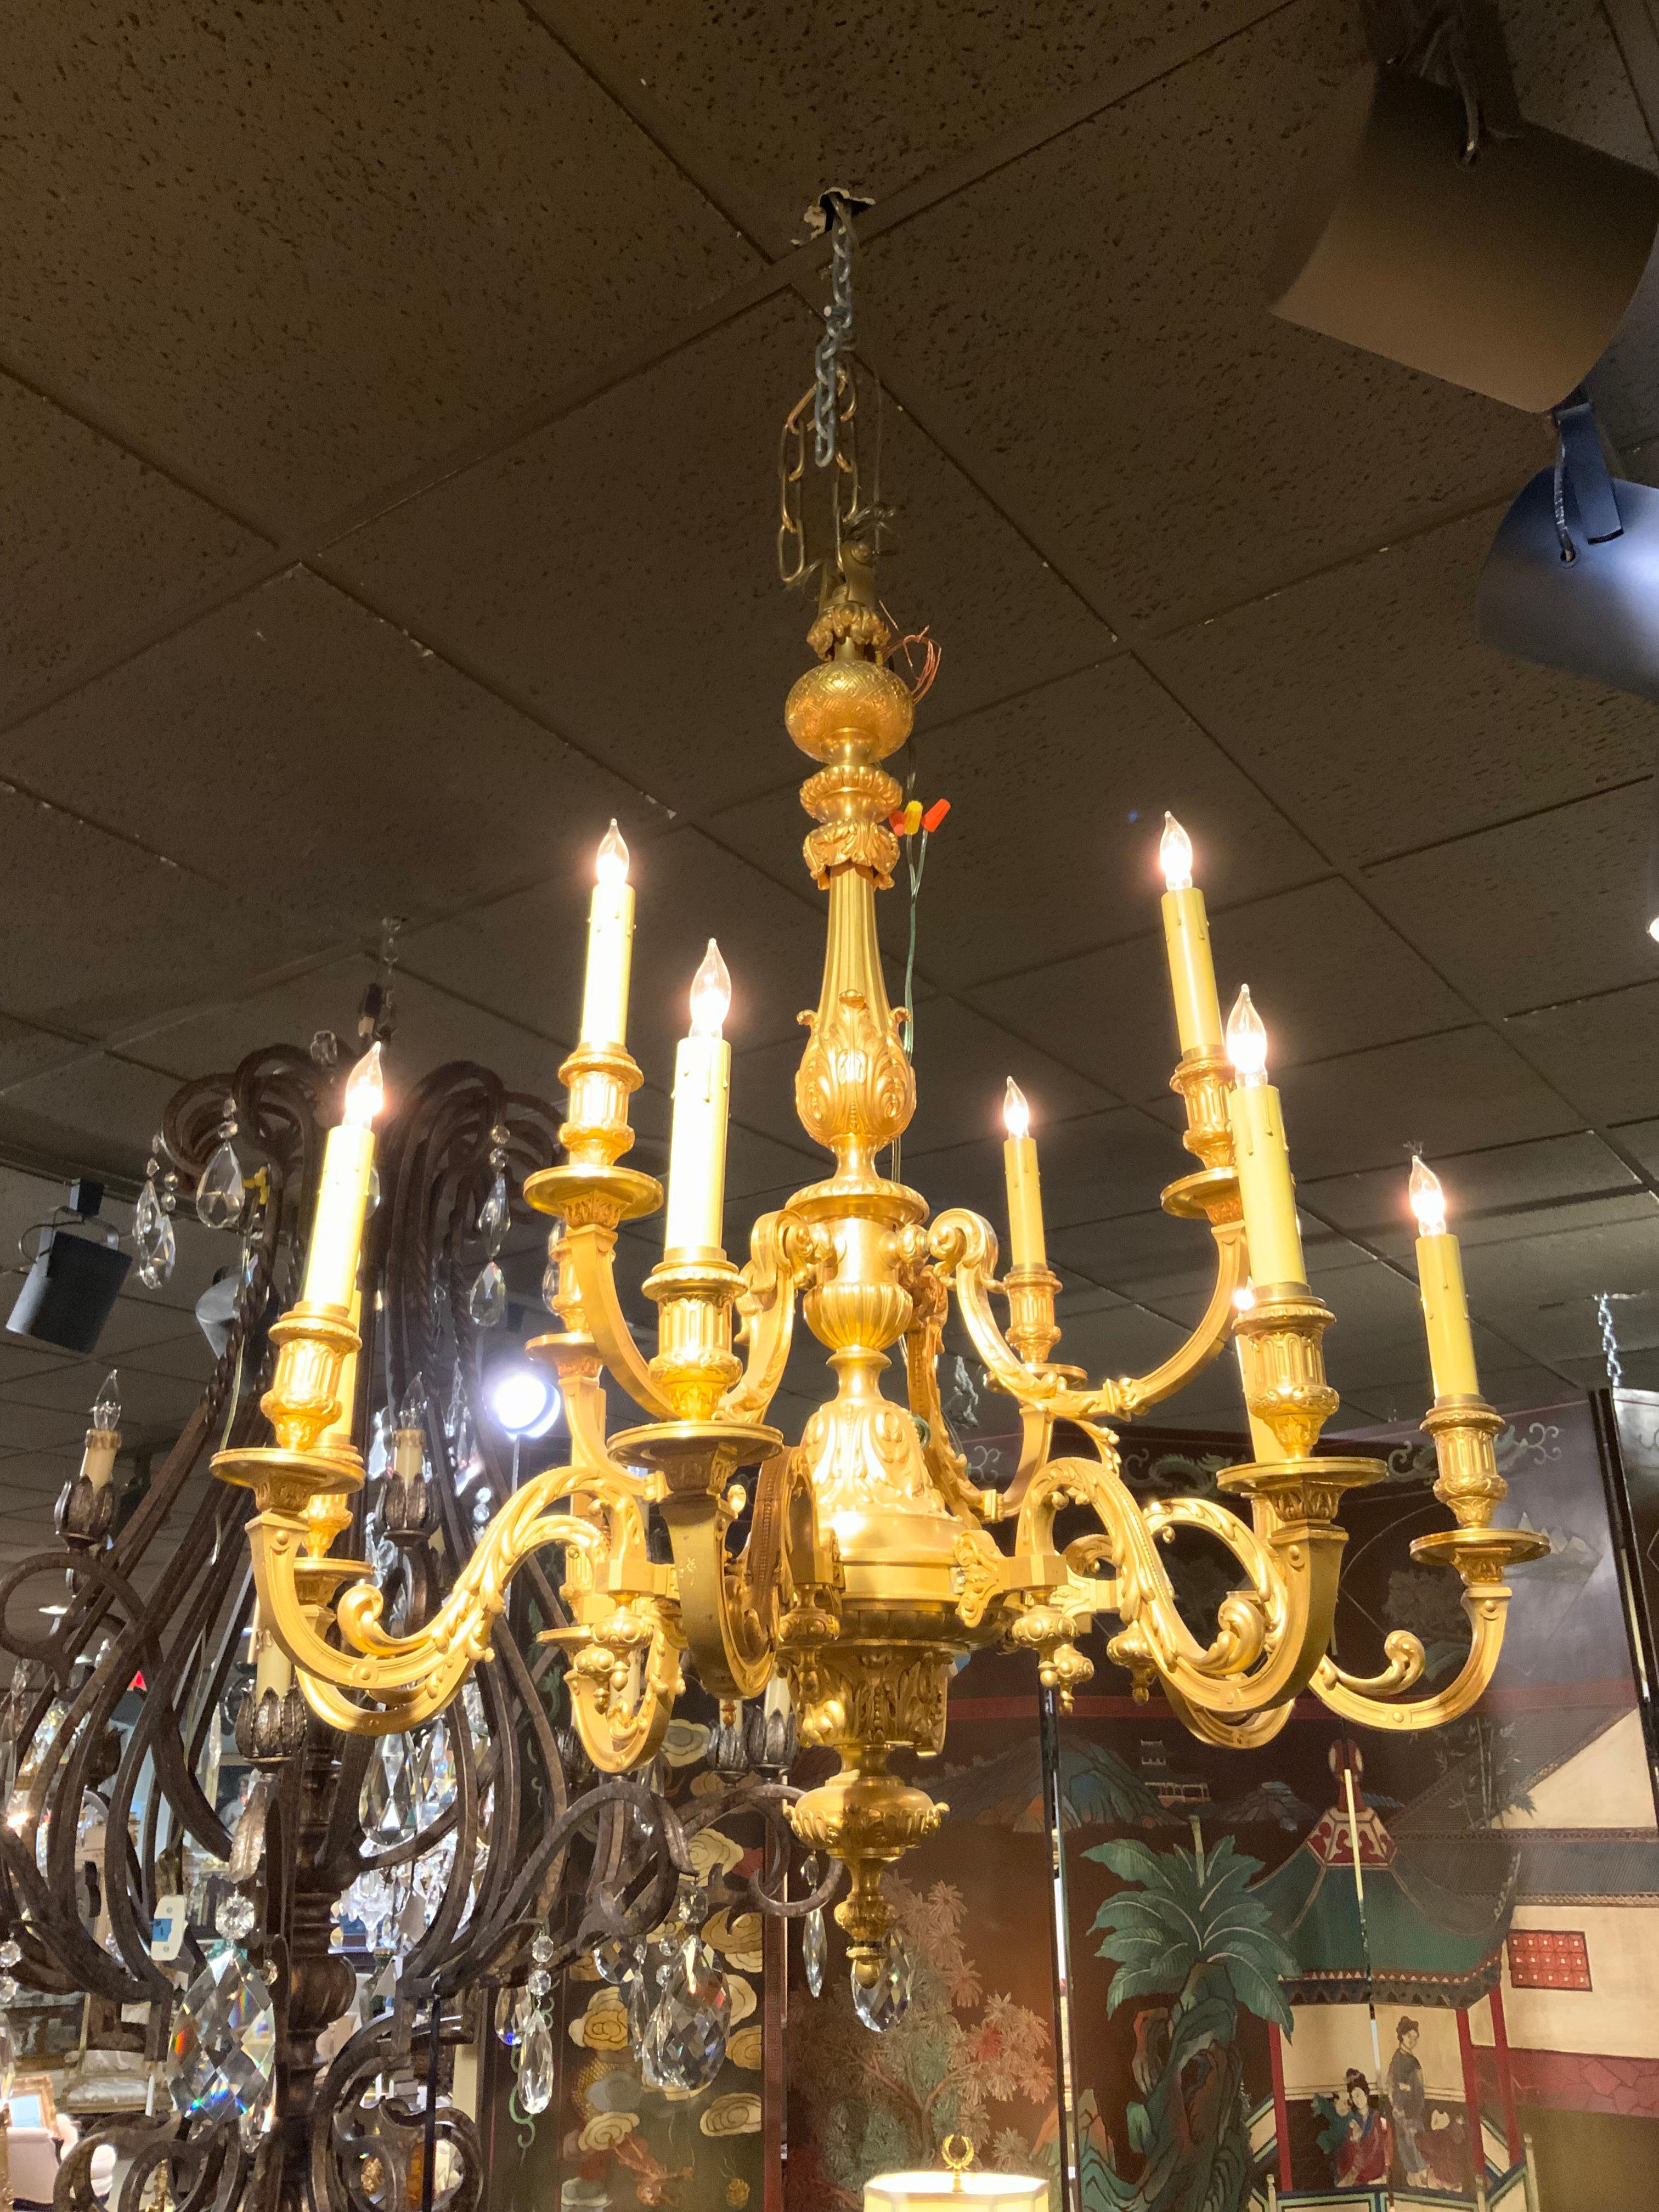 This chandelier has fine definition because the casting of this
Bronze is very fine quality. The gilding on this piece is brilliant
And shows no wear. The scrolling arms are gracefully with an
Open wide spread. The wiring is good and it is ready